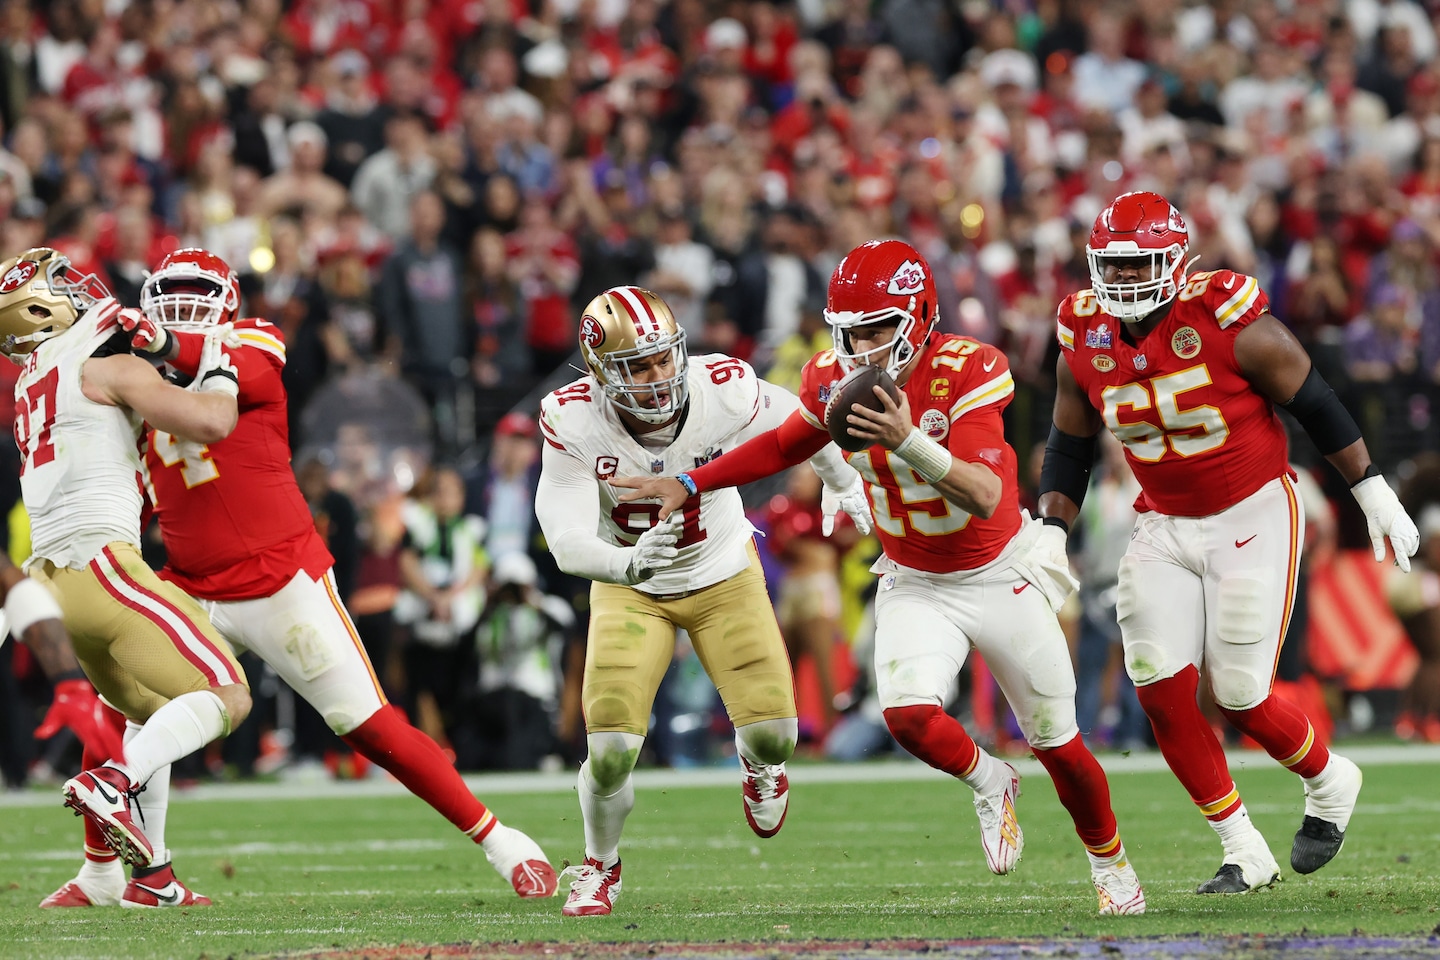 Chiefs score game-winning touchdown to beat 49ers in overtime, 25-22